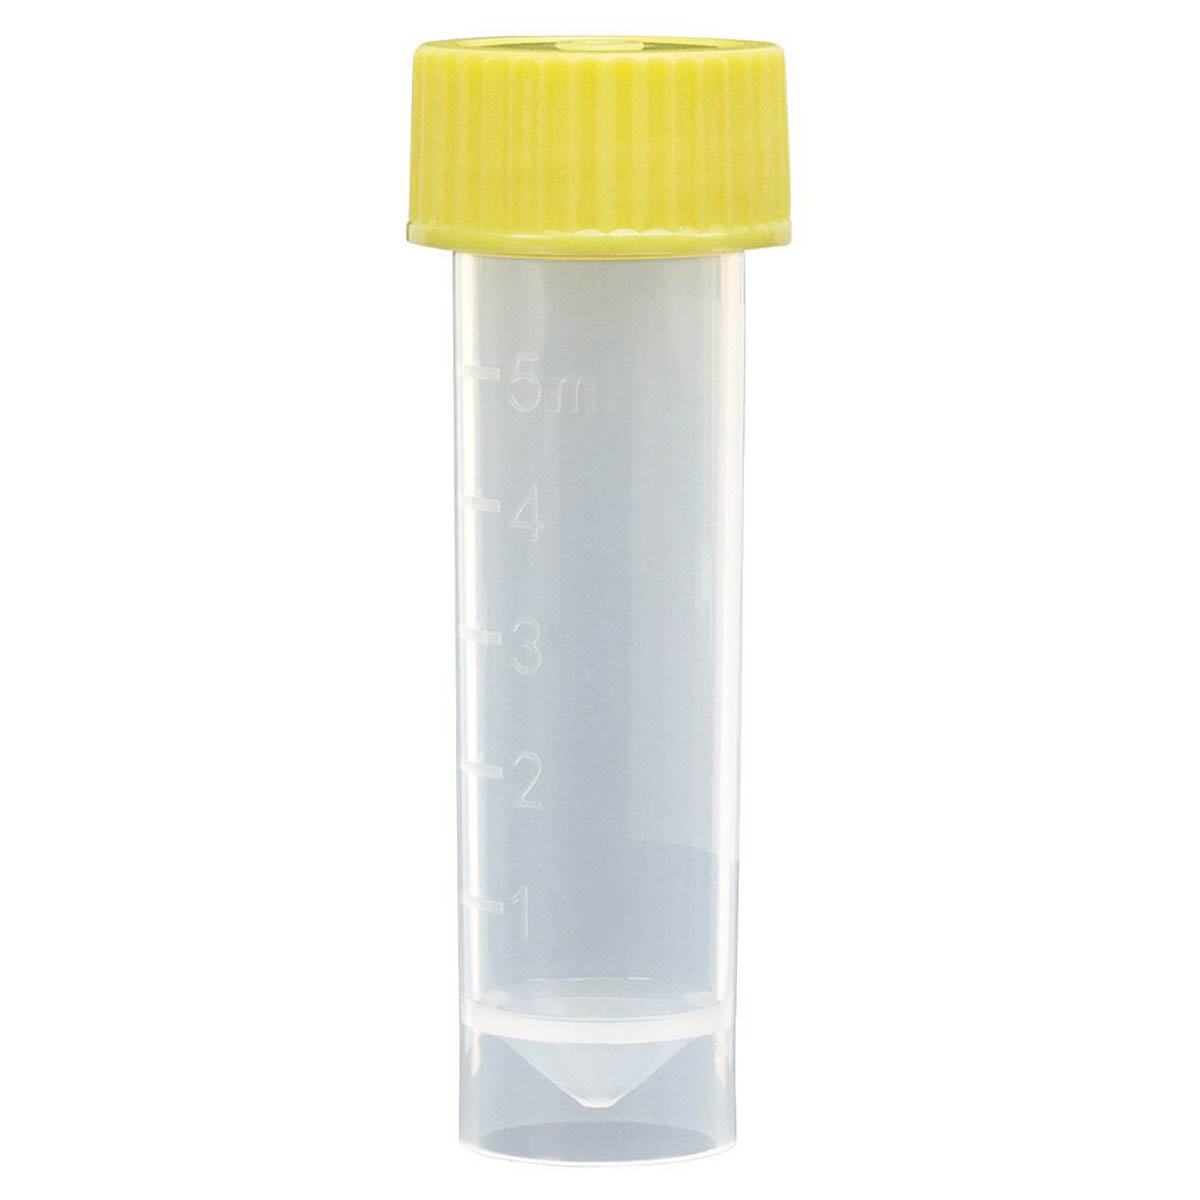 Transport Tubes 5mL - PP Self-Standing Conical Bottom with Unassembled PE Yellow Screw Cap (Case of 1000)